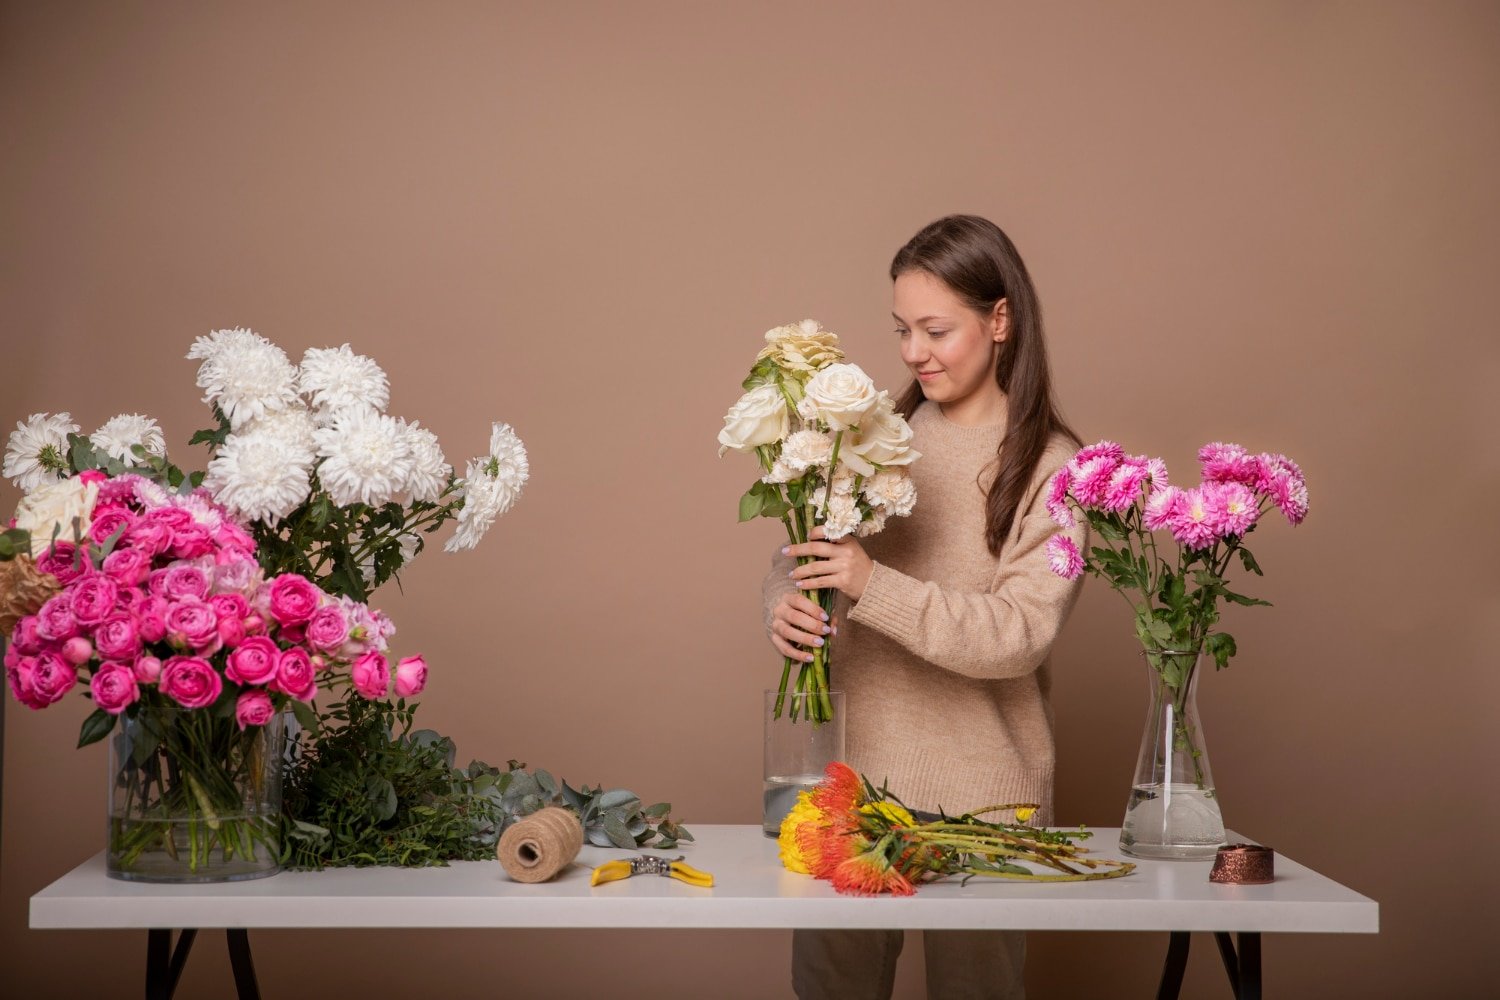 Brighten Someone’s Day With Flowers For Dreams’ Sustainable Floral Arrangements